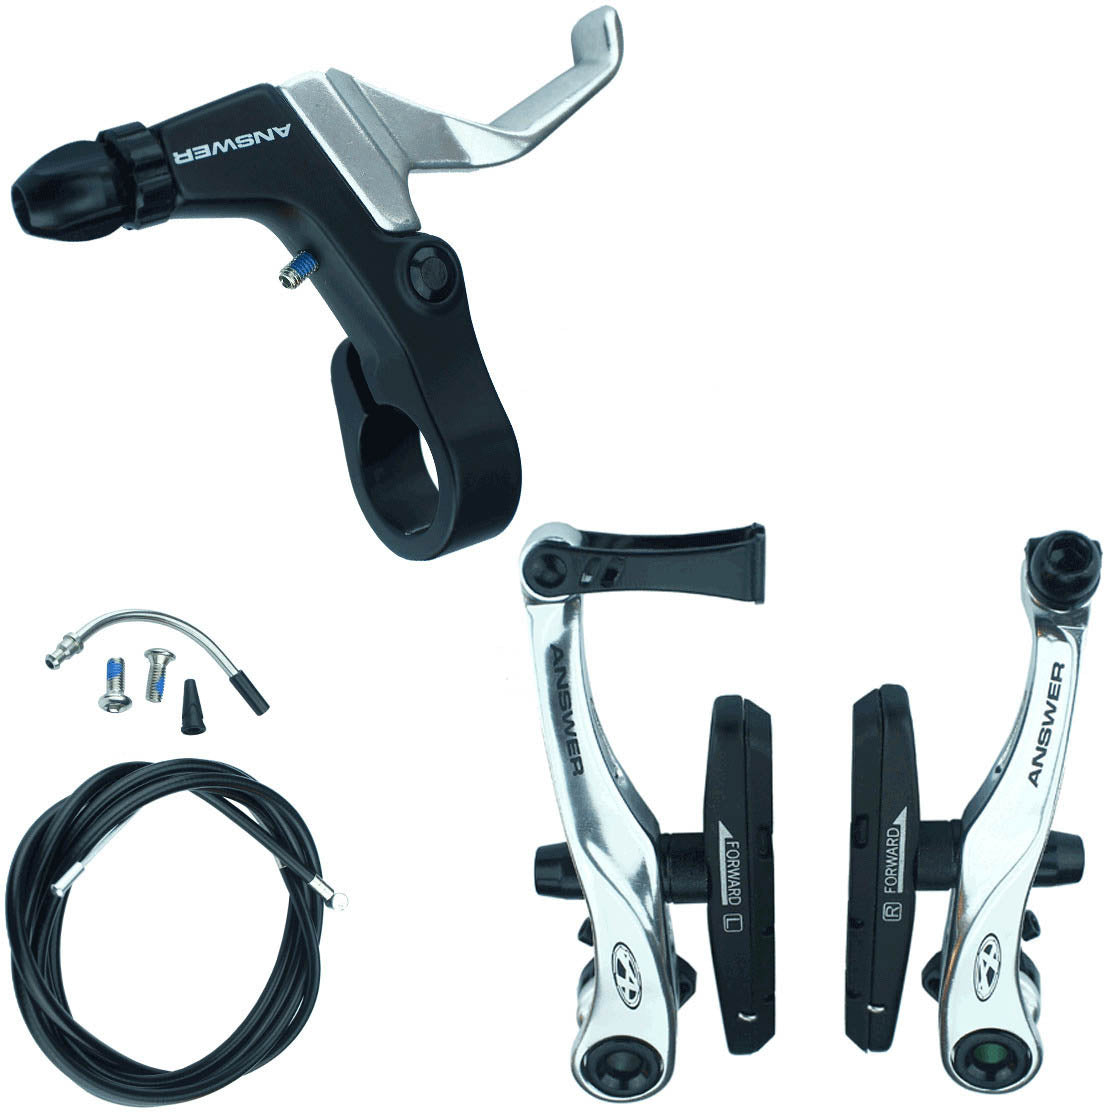 Bicycle brake components including a lever, calipers, Answer Mini V-Brake Kit pads, and cables, arranged on a white background.